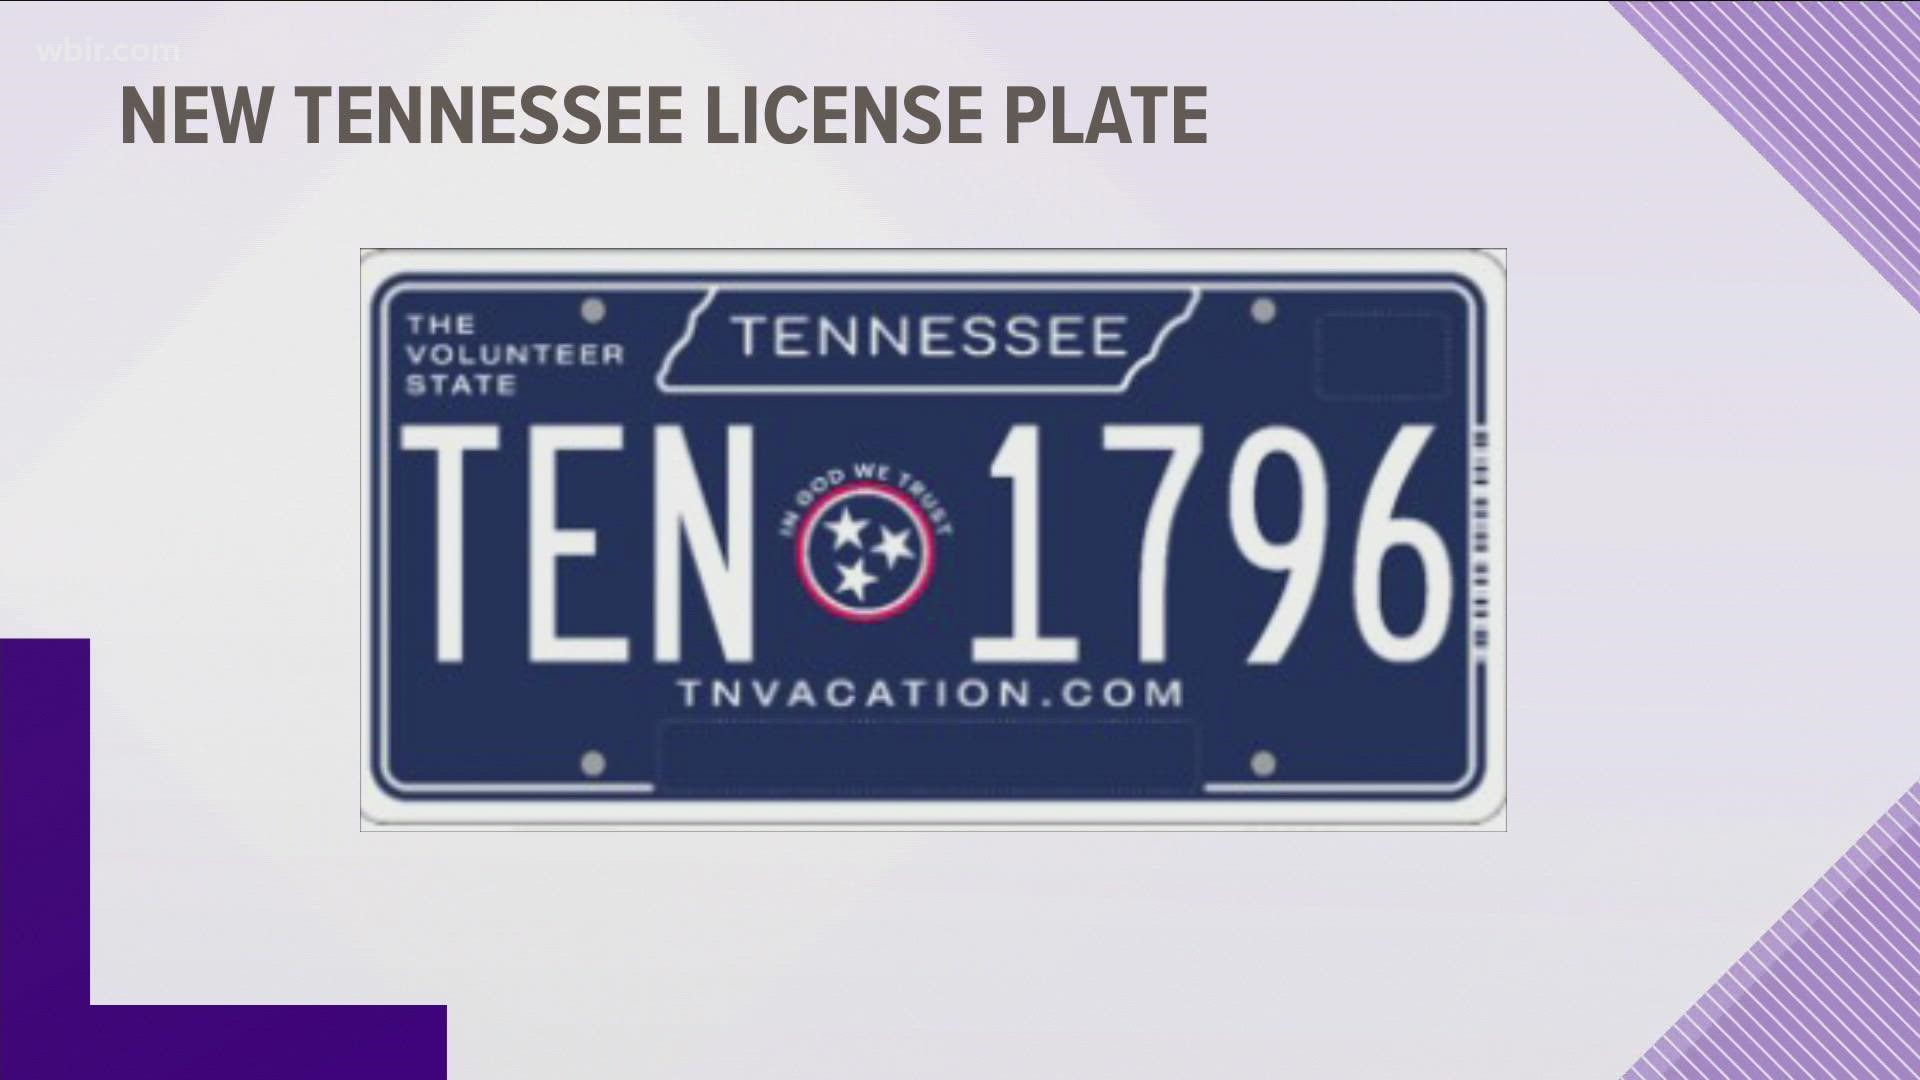 How can I get Tennessee's new license plate?